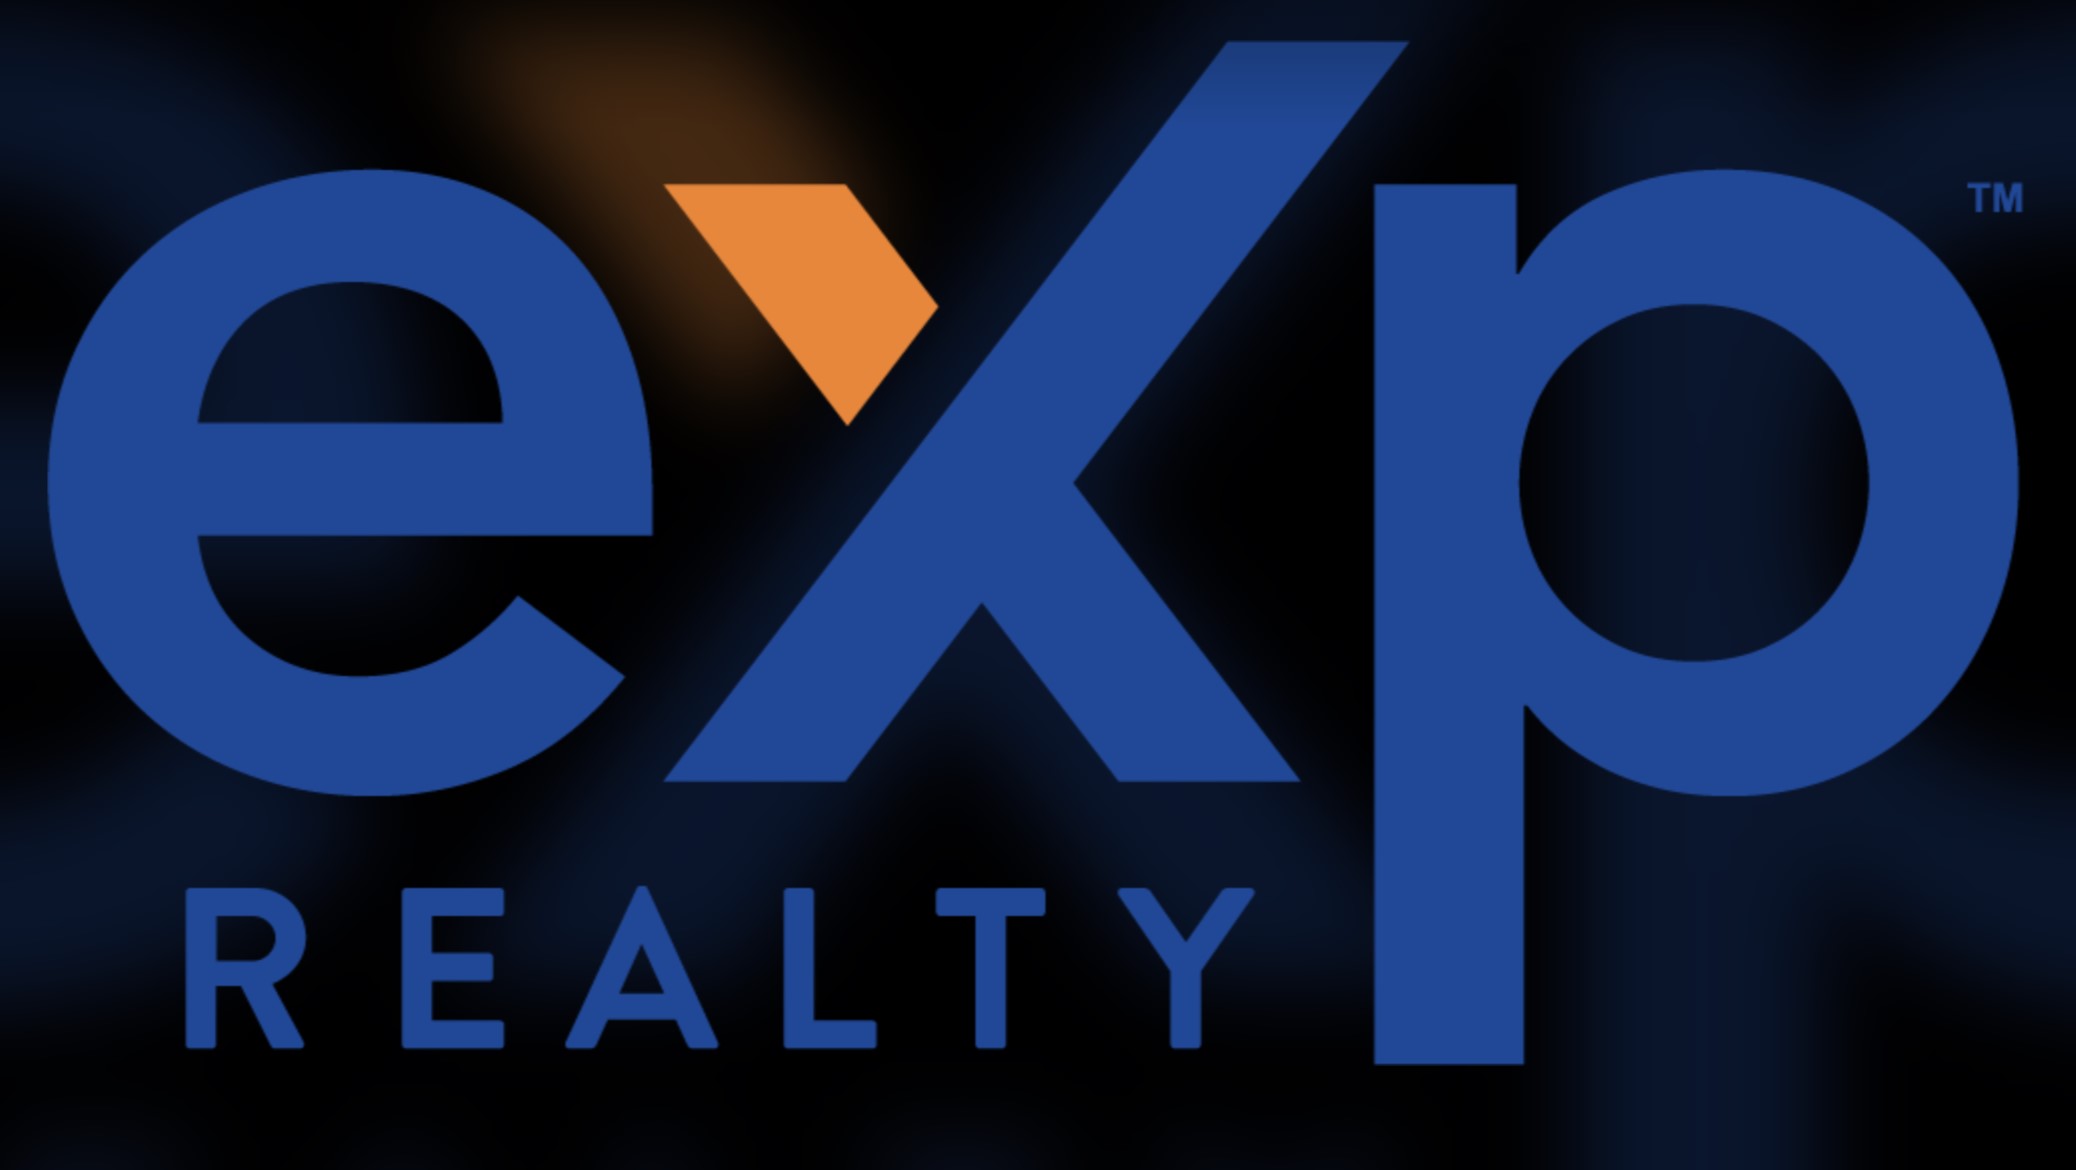 6 Facts About EXp Realty - Facts.net